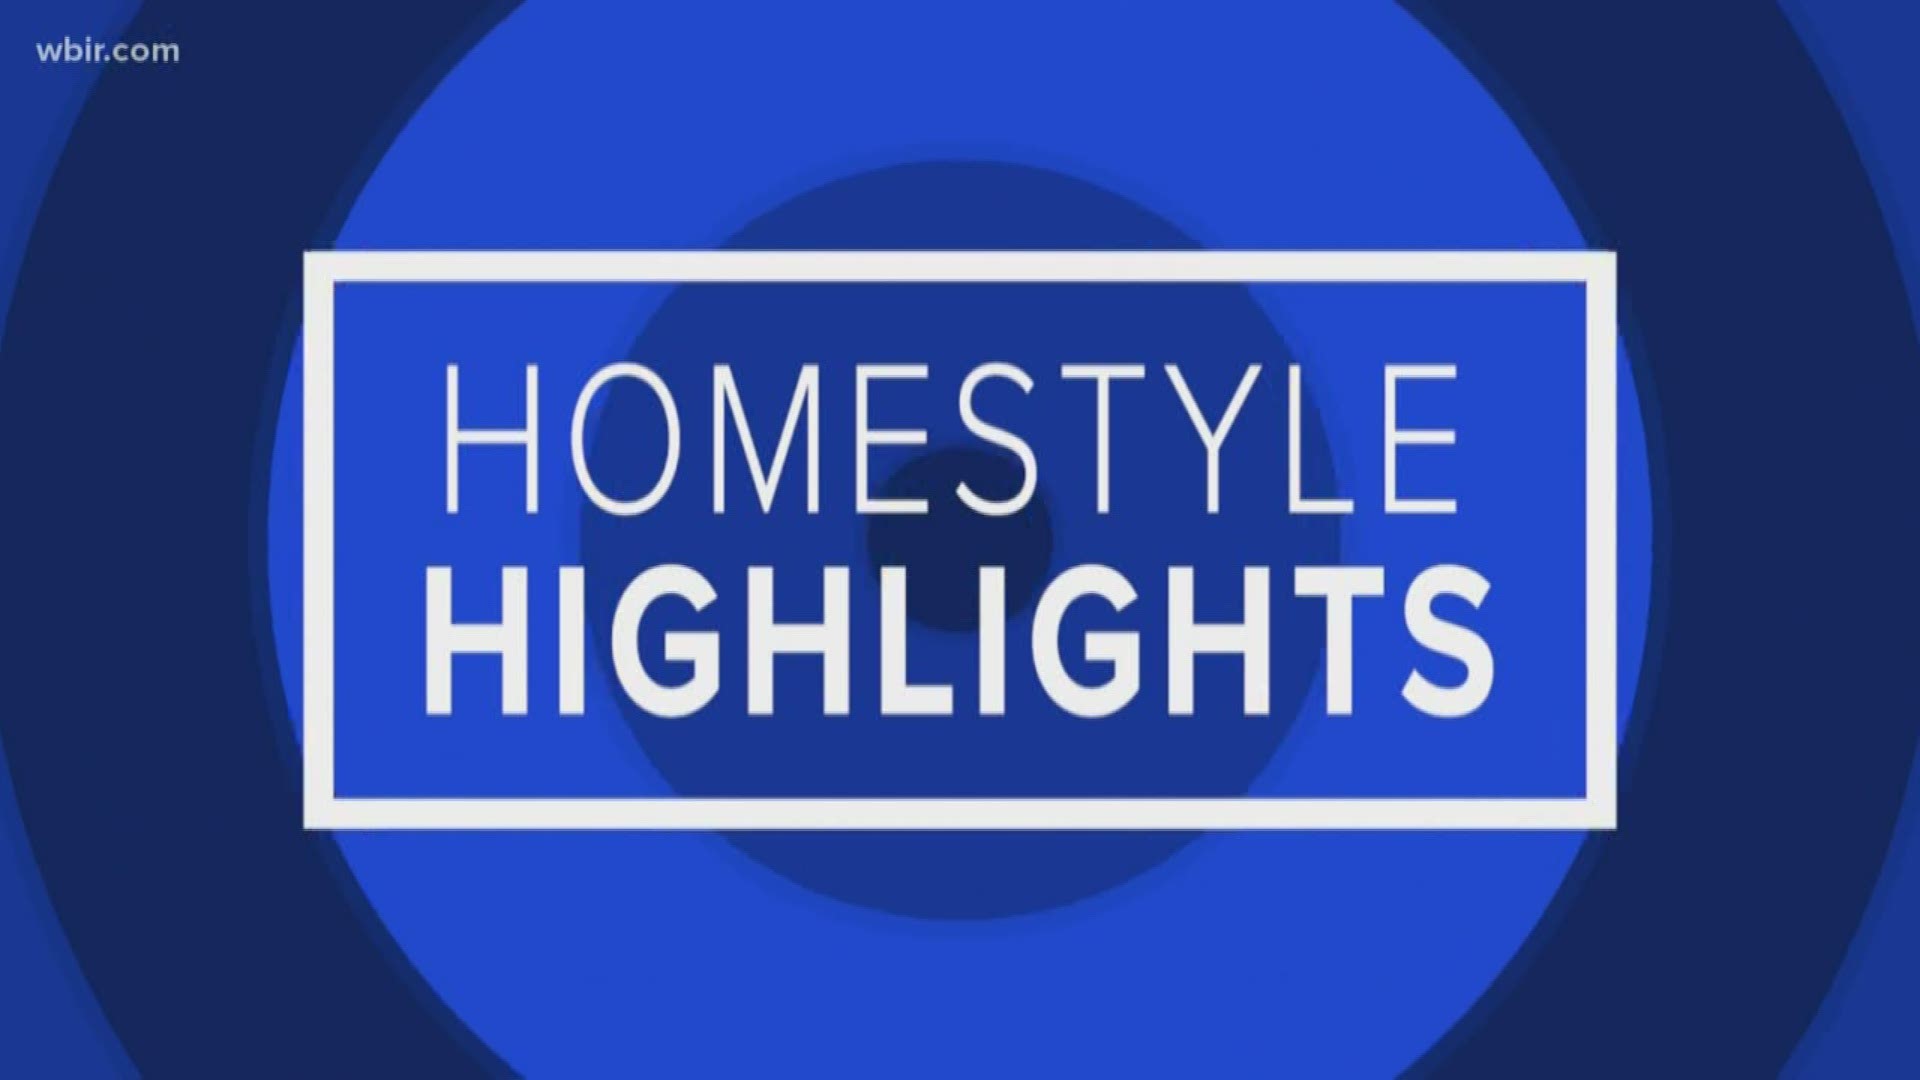 More Homestyle Highlights! You send in your best videos of sports or sport-like activities.